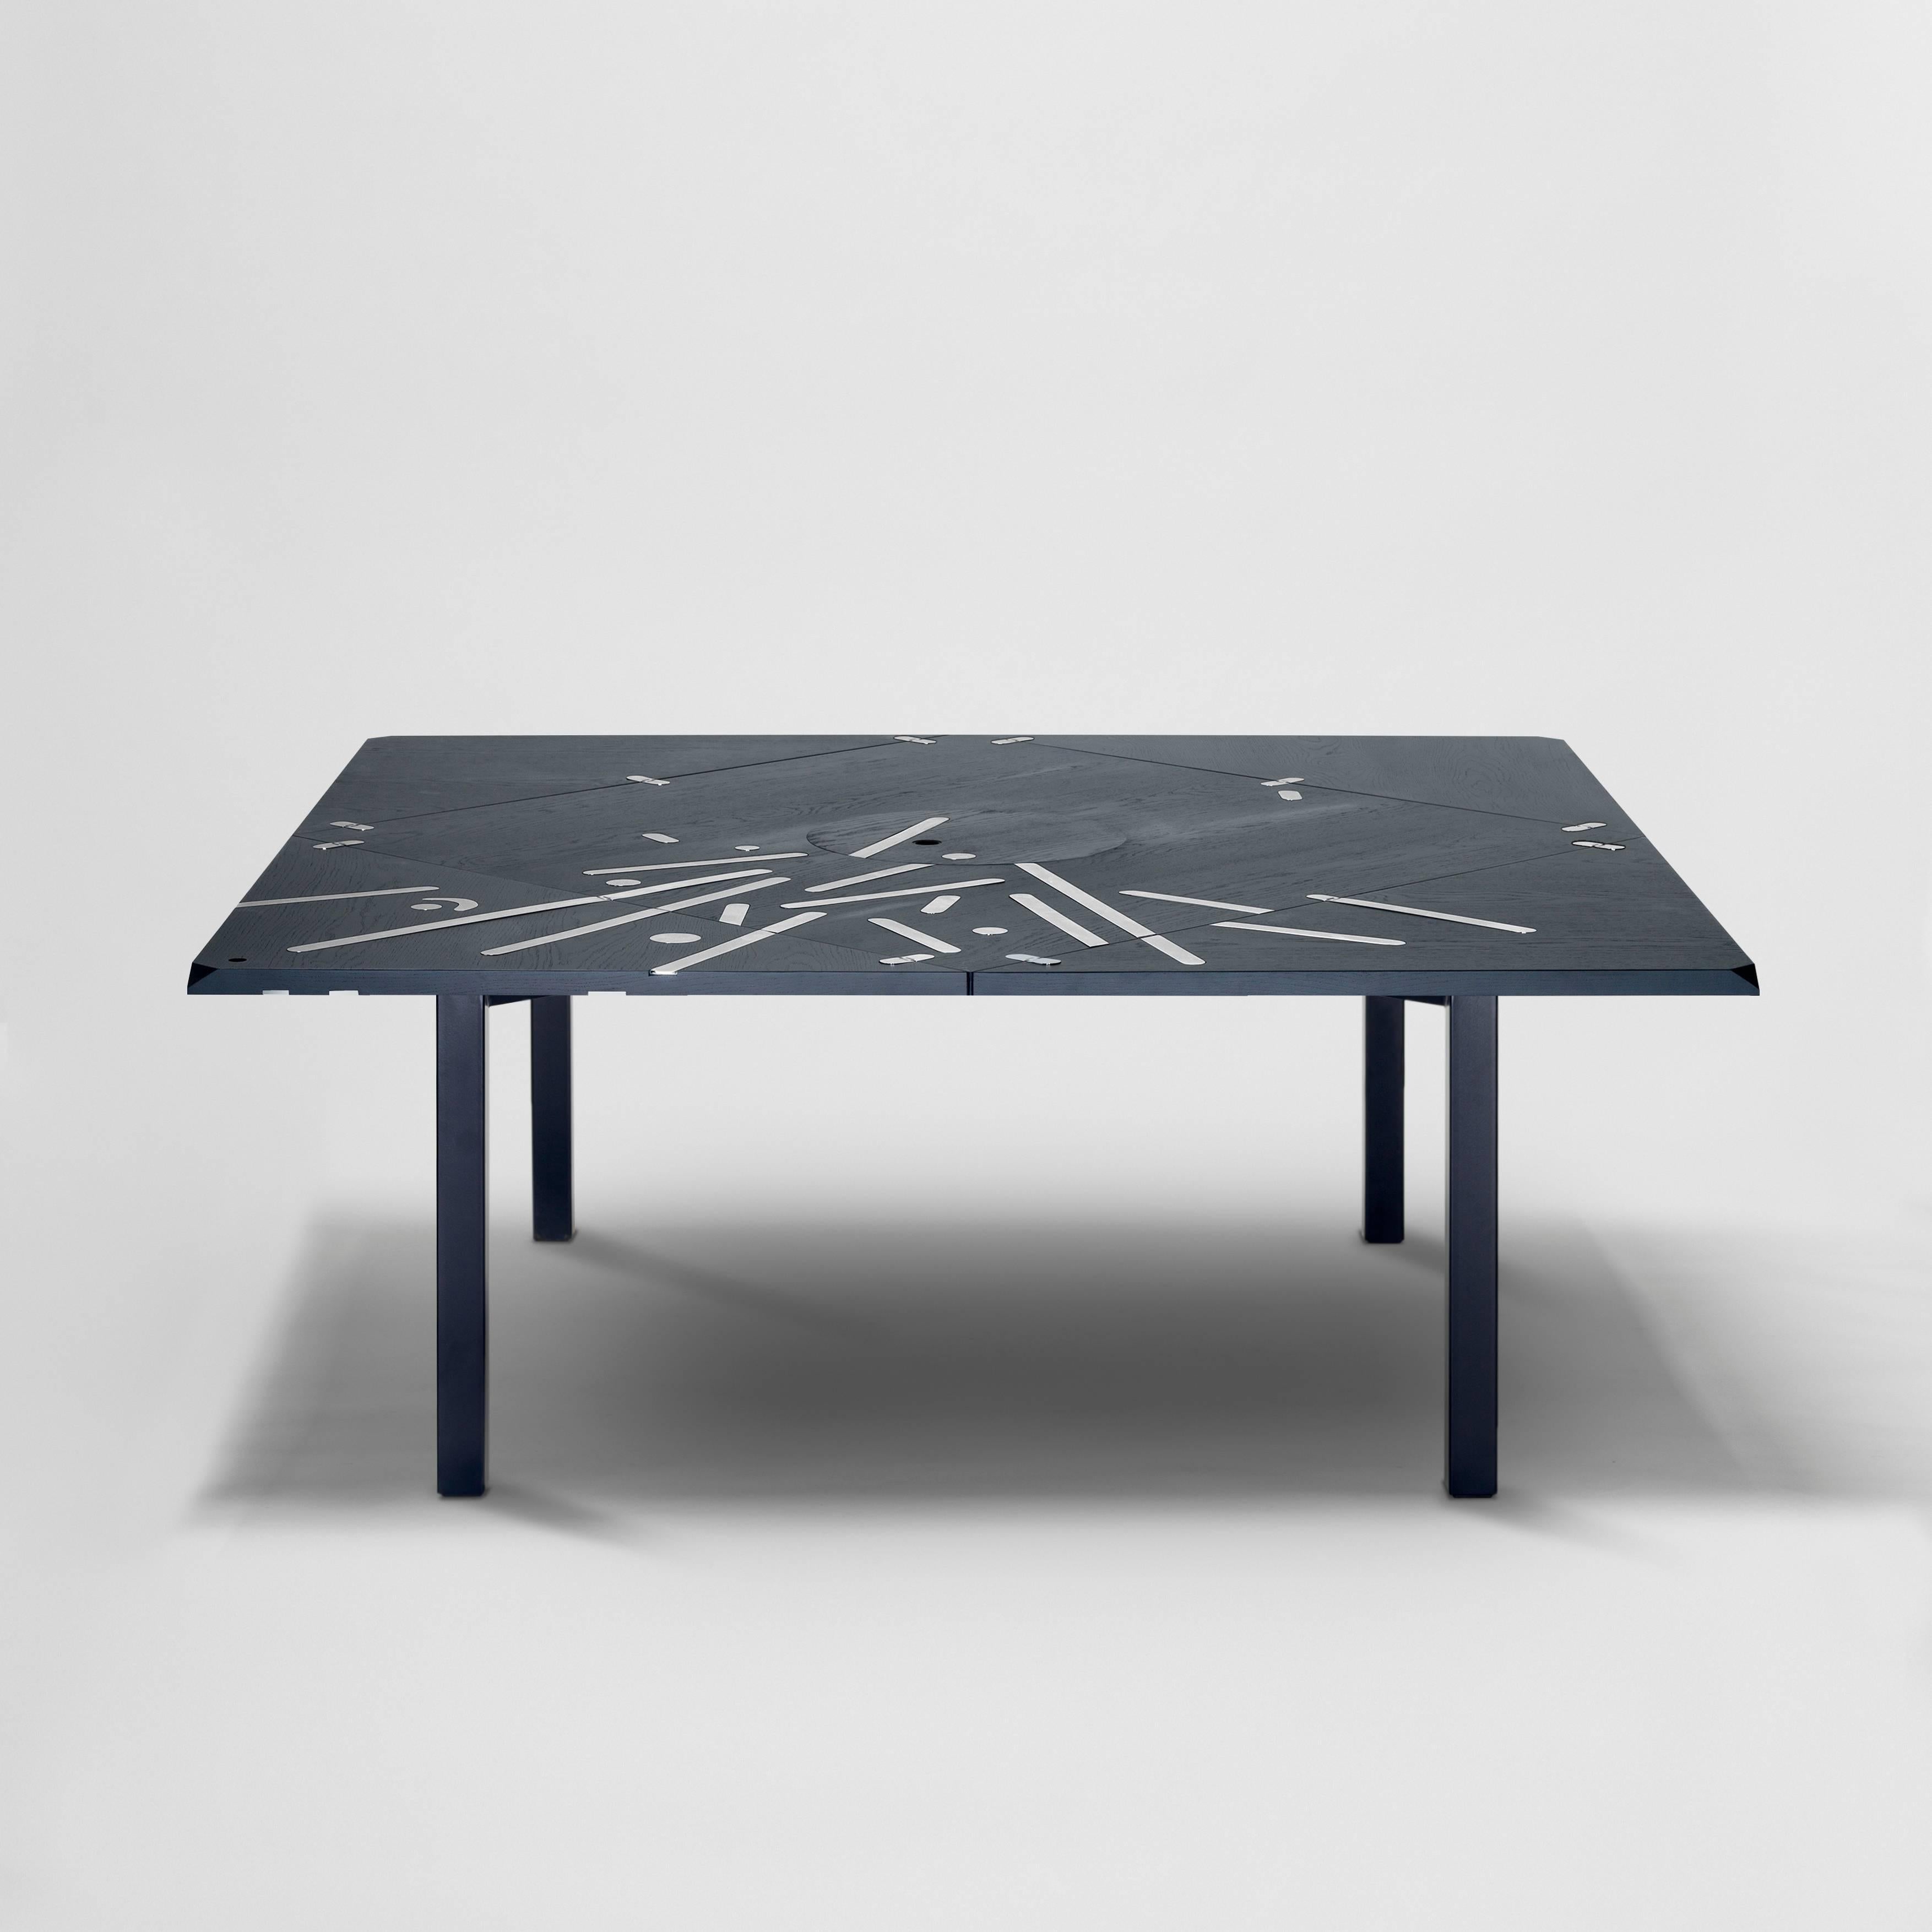 Spanish Limited Edition Alella Table by Lluís Clotet